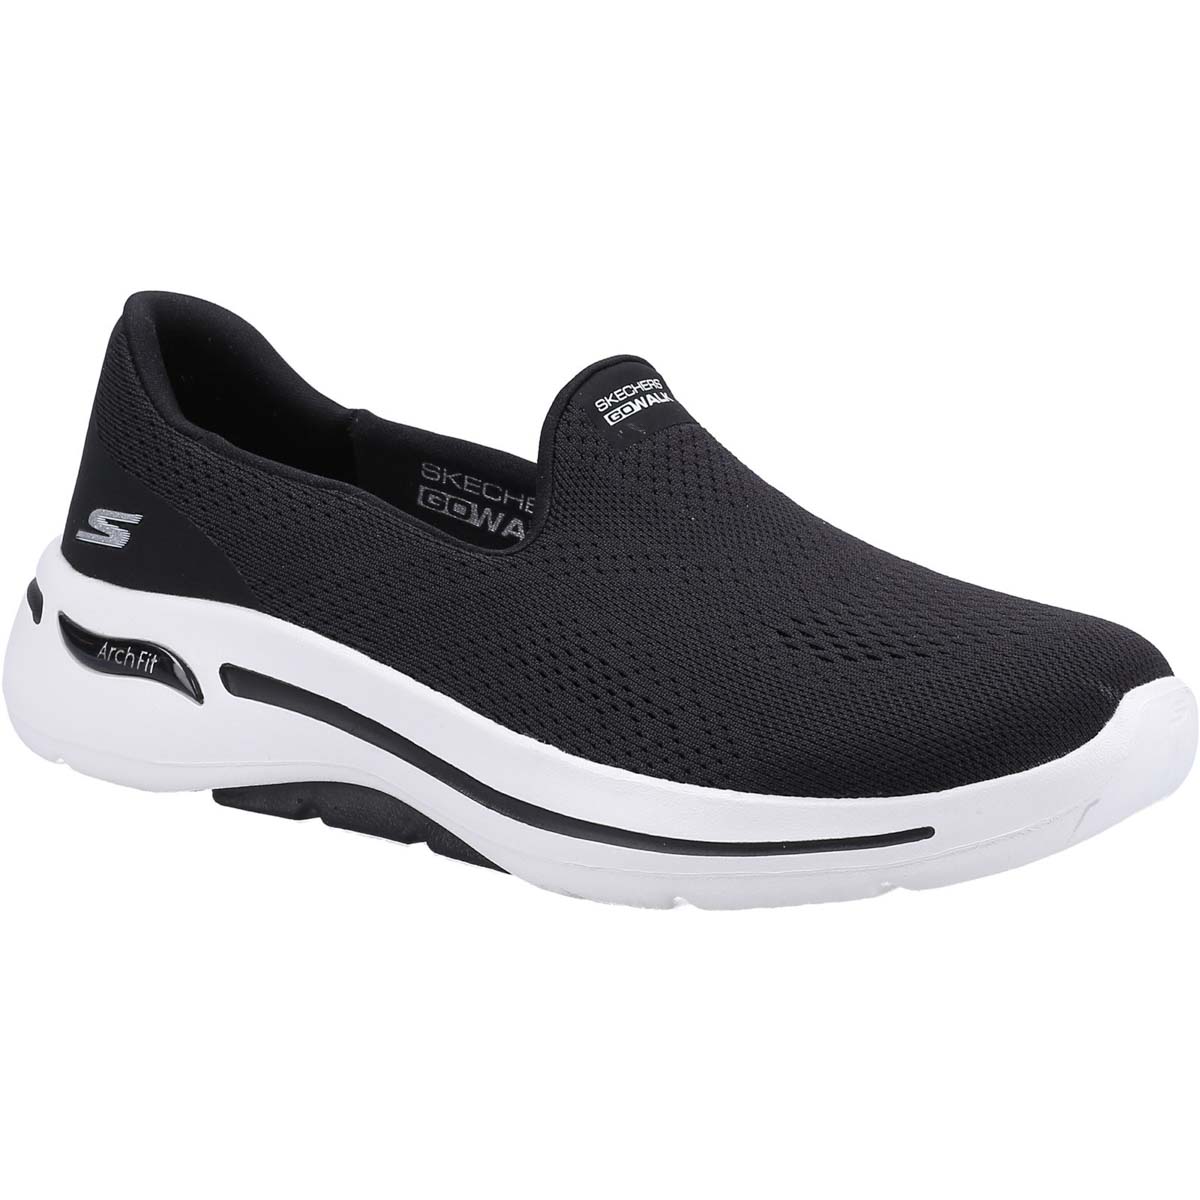 Skechers Go Walk Arch Fit Imagined Black Womens Trainers 124483 In Size 3 In Plain Black